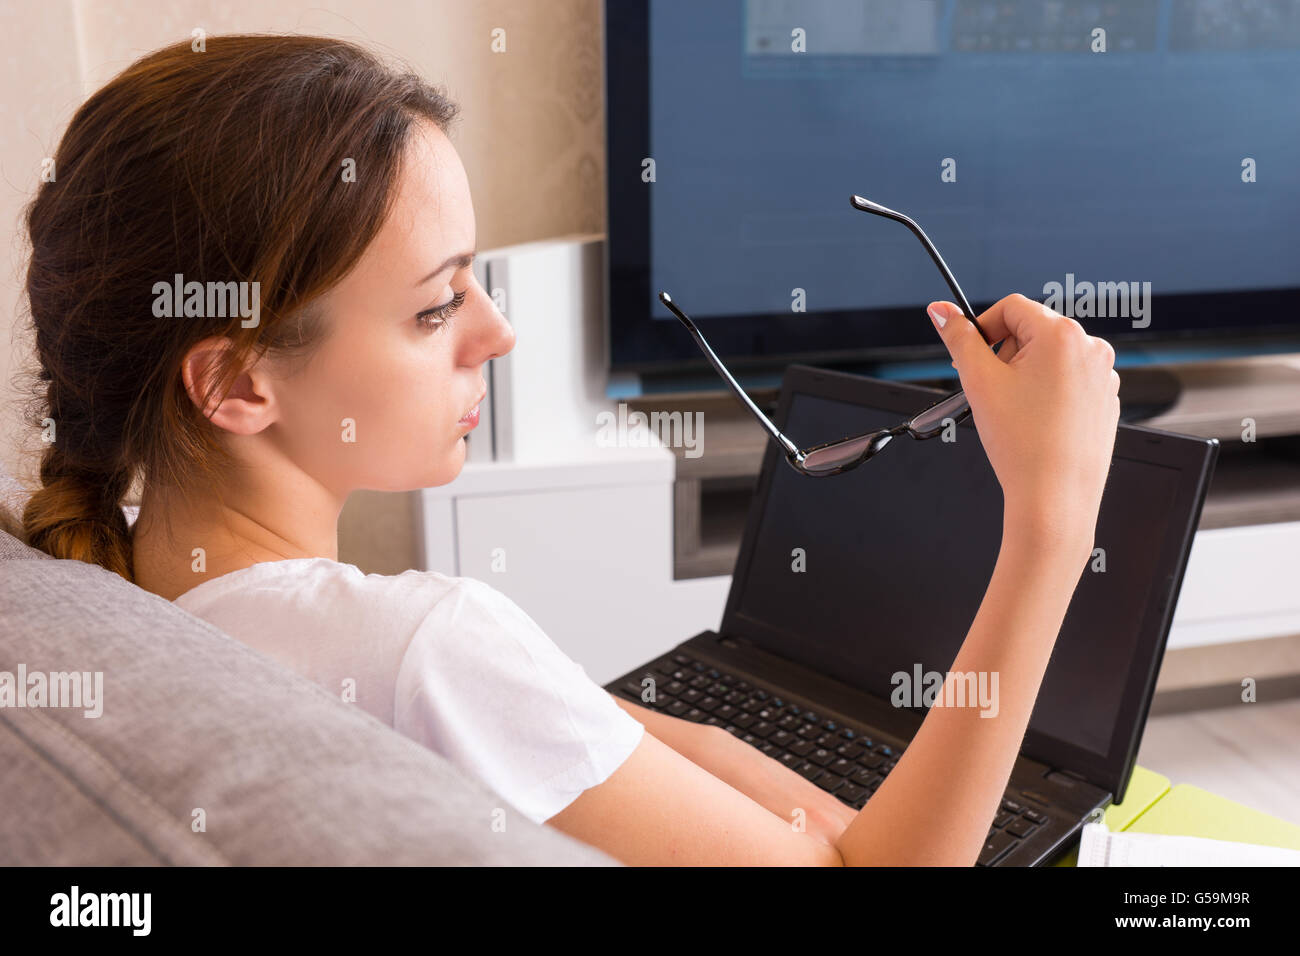 Back view of attractive woman holding glasses while working on a laptop doing her business from home sitting on a sofa in the living room  in a relaxed atmosphere. Stock Photo